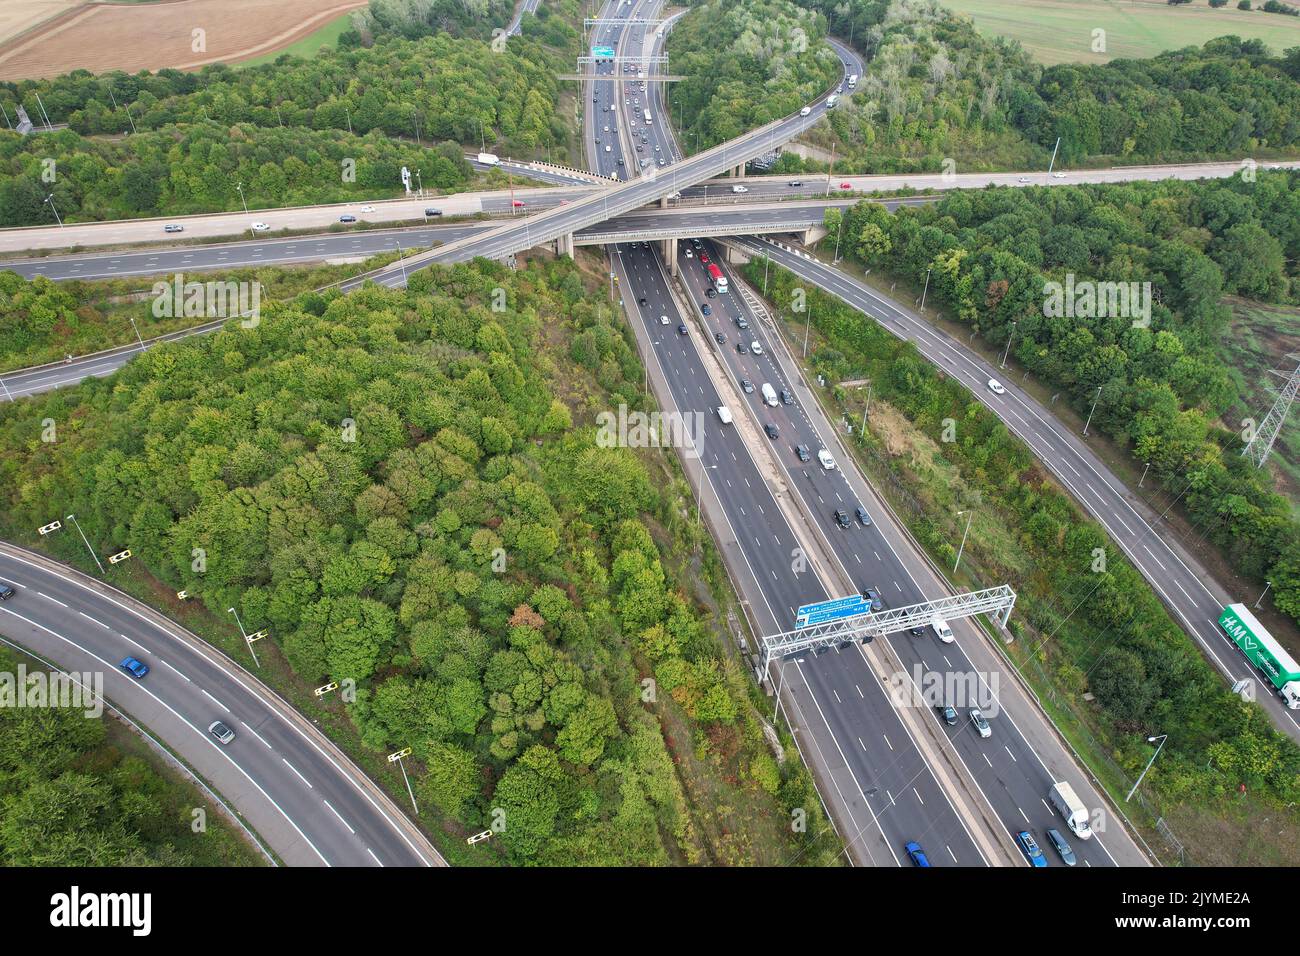 British Motorways and Highways Road with Traffic, high angle drone's ...